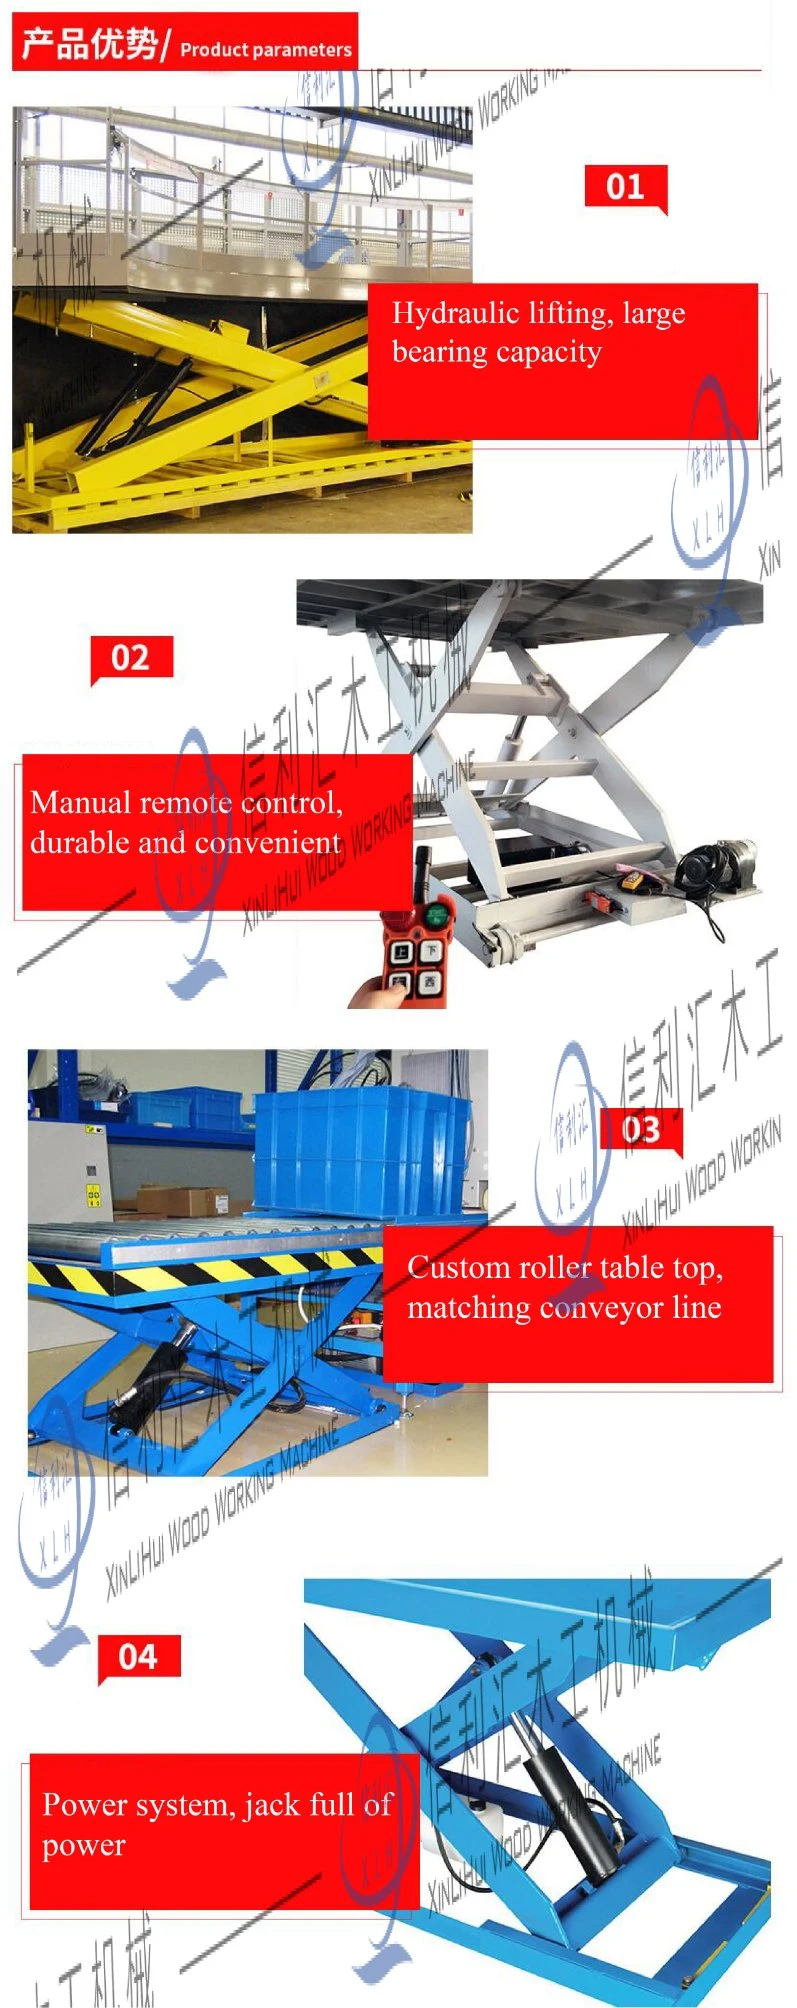 Lift Table Lifting Platform Fixed Hydraulic Lifting Platform Stationary Hydraulic Lifting Platform Sjyg Base for Transfer Mobile Cart, Metal Cart,